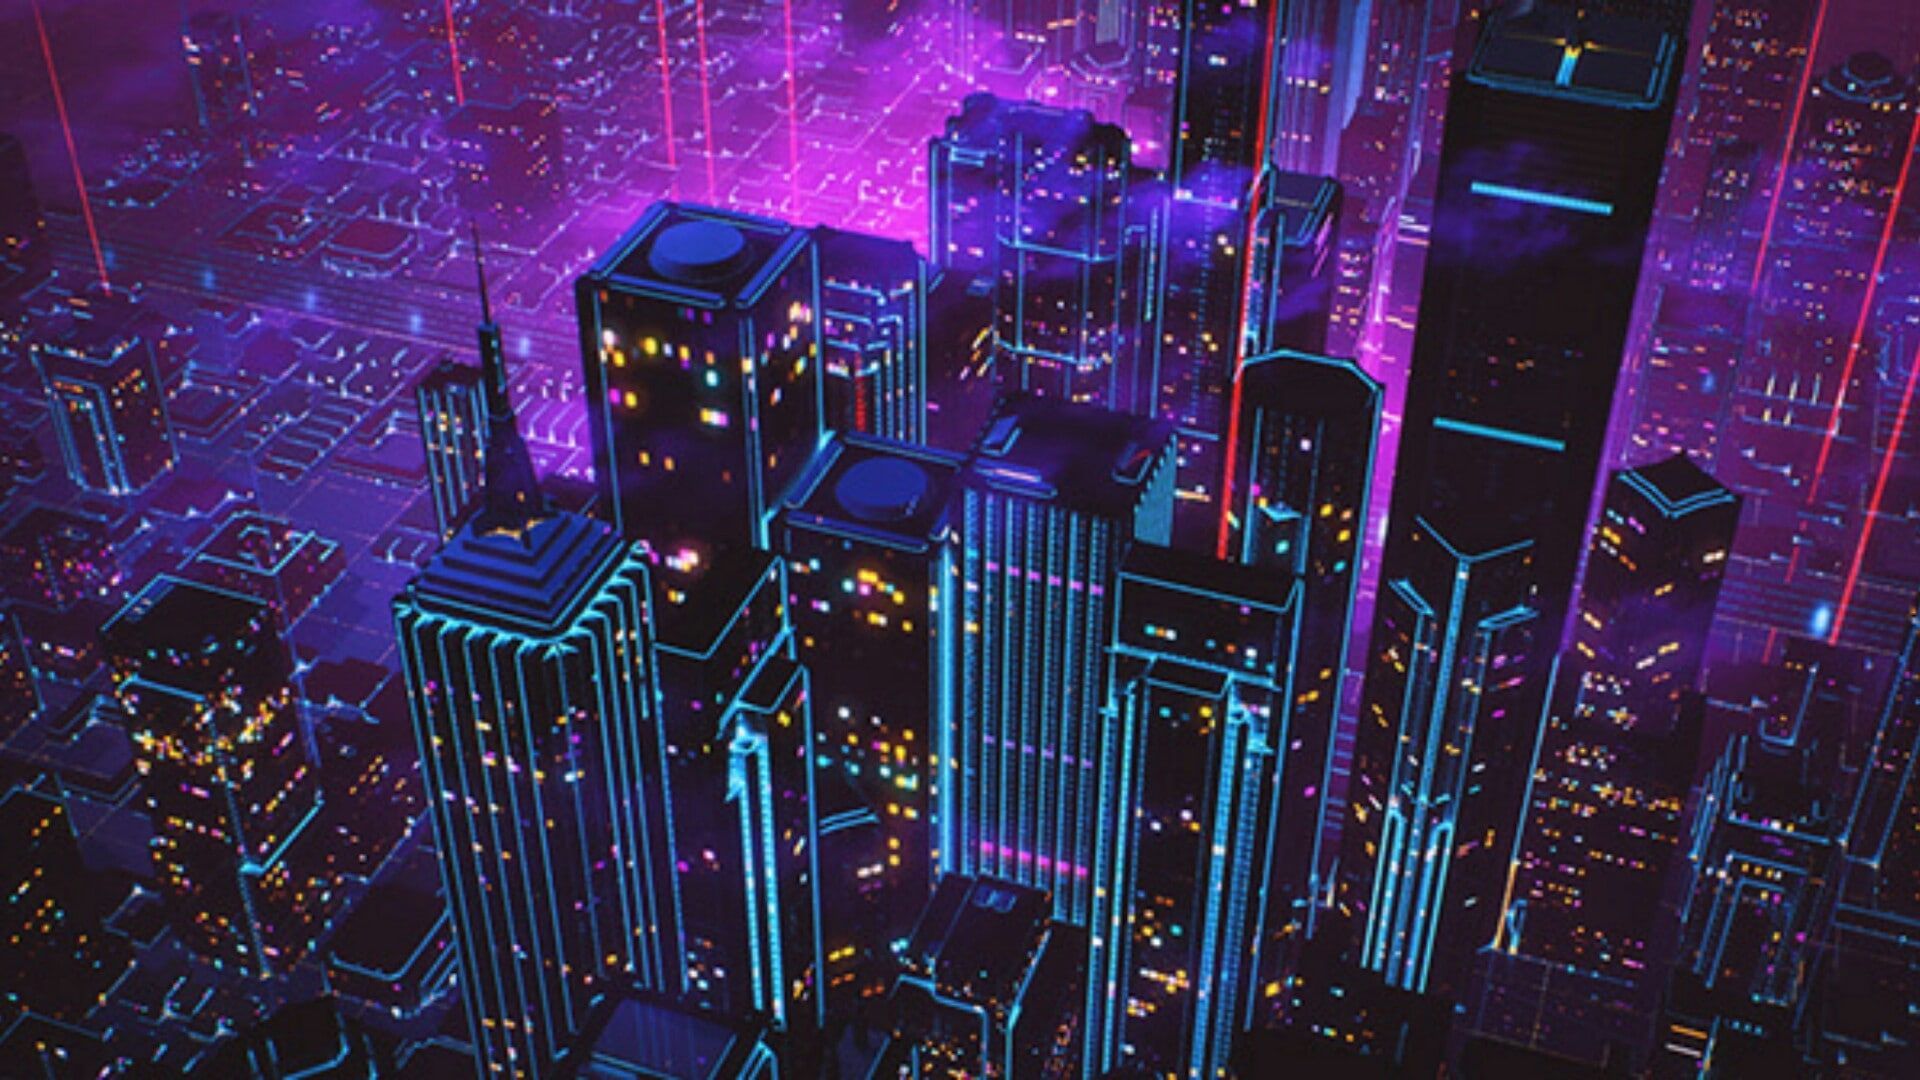 A futuristic city with neon lights and buildings - Technology, 80s, city